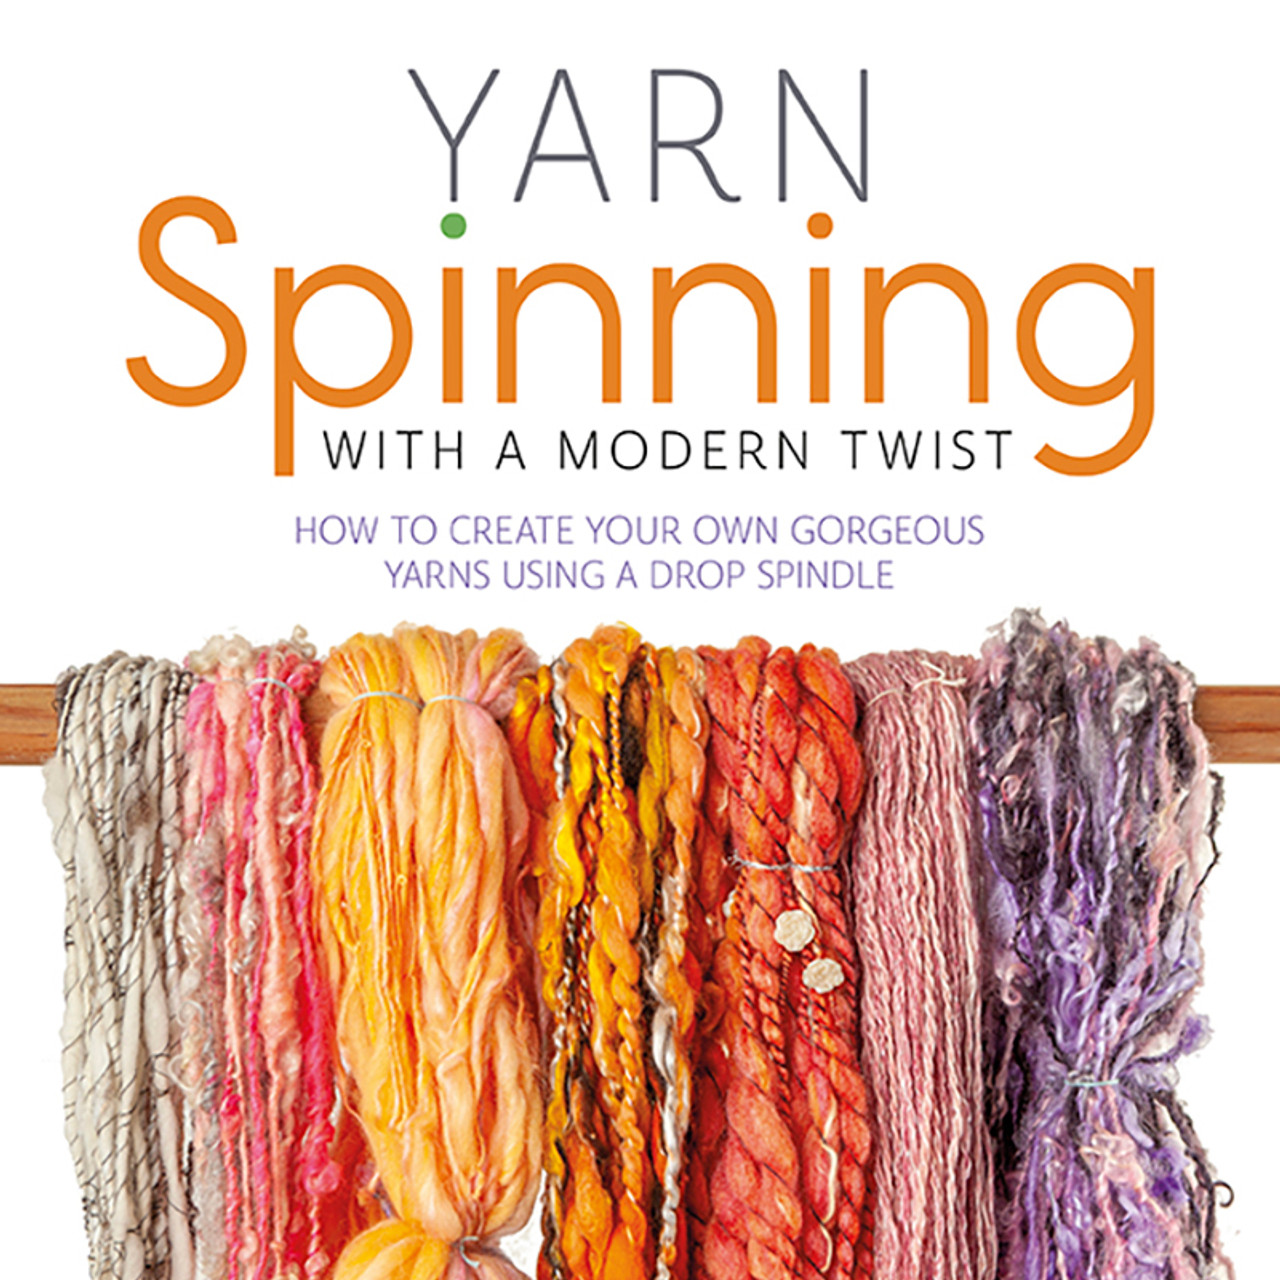 Spinning yarn is making a comeback, with a new twist - National